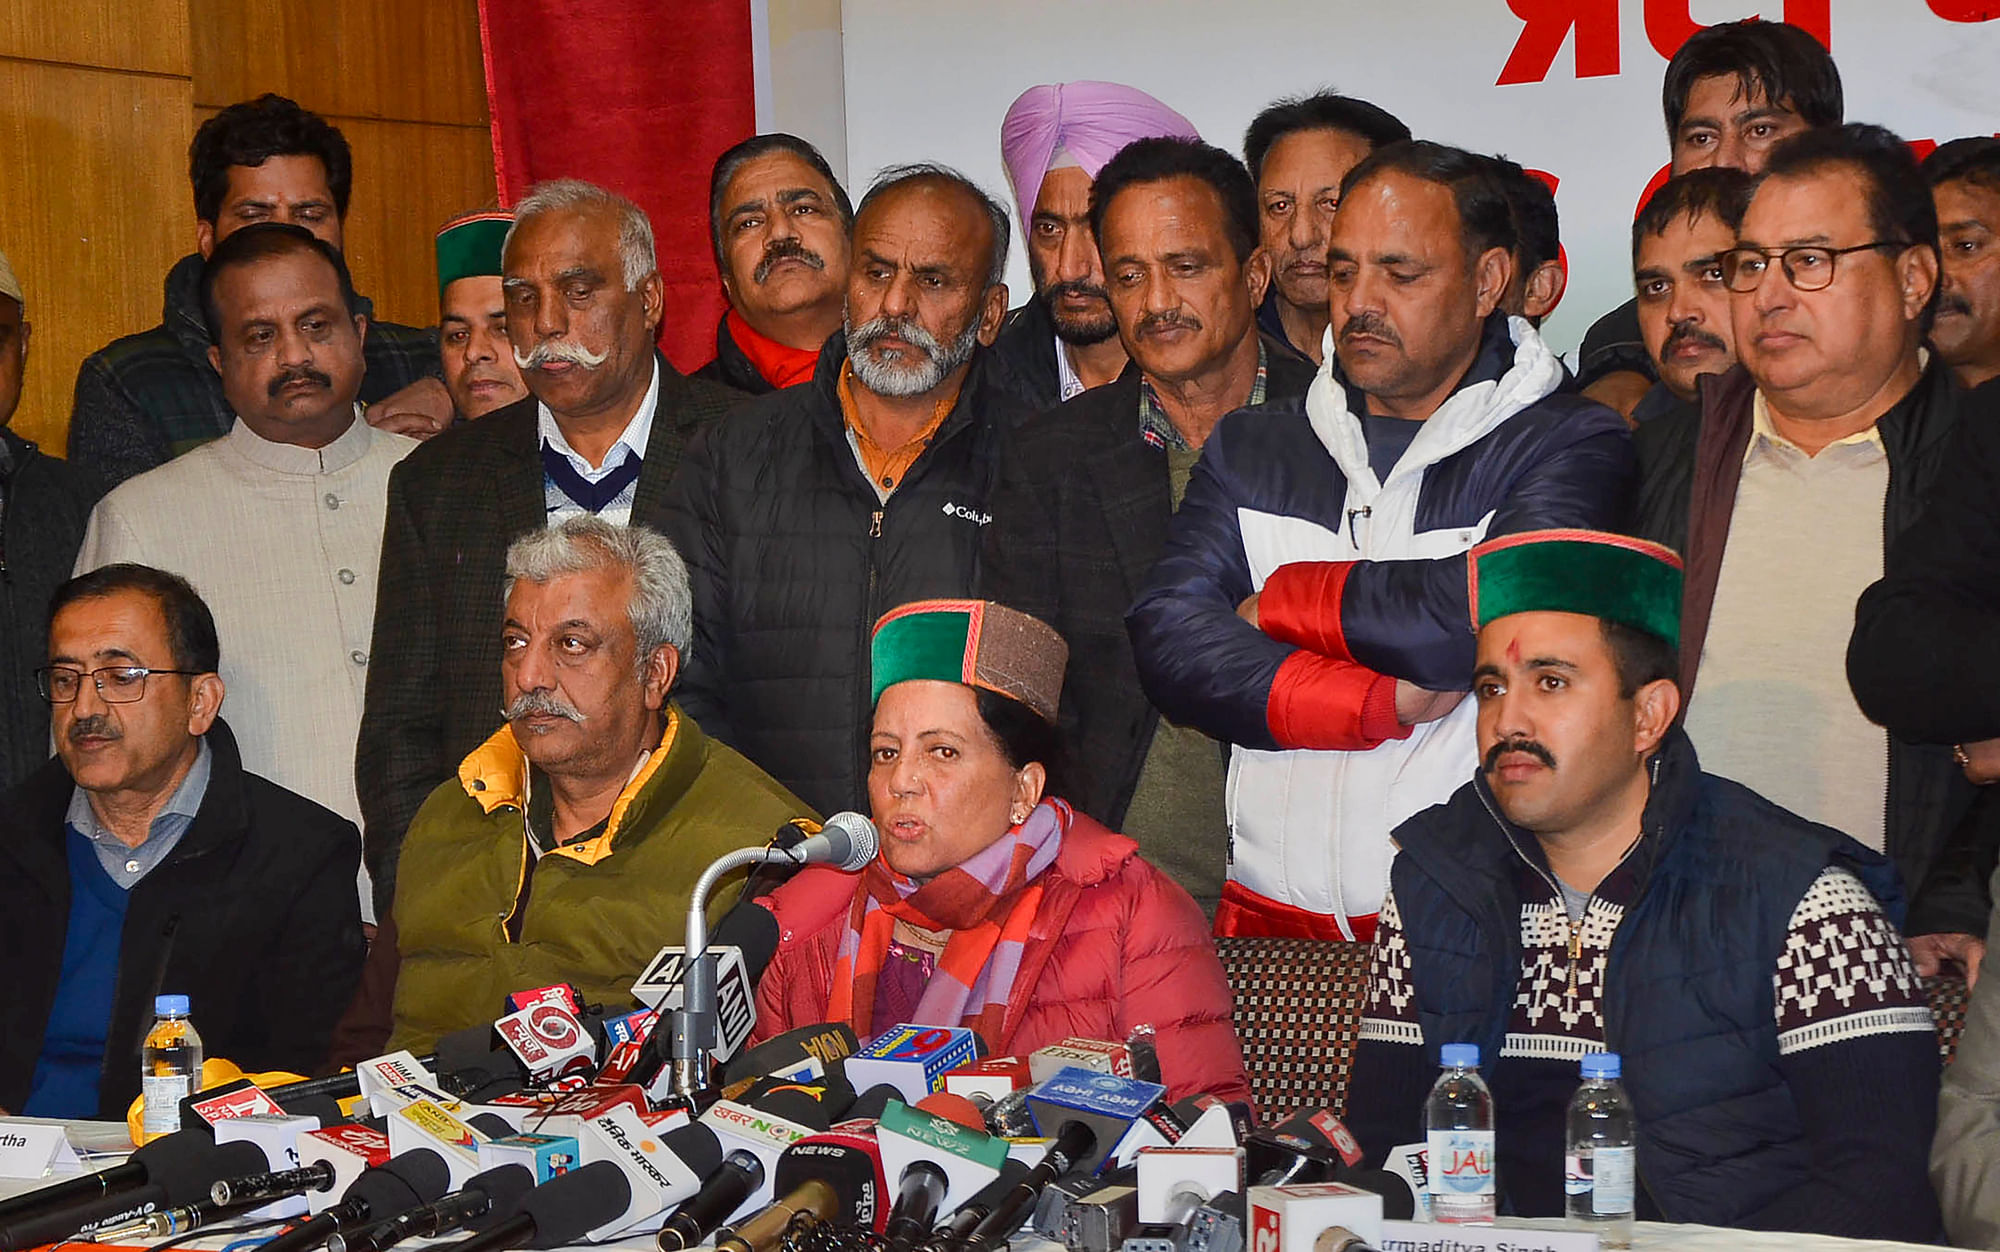 <div class="paragraphs"><p>Shimla: Himachal Pradesh Congress President Pratibha Singh adresses a press conference after the party's victory in State Assembly elections, in Shimla, Thursday, Dec. 8, 2022. Congress candidates Harish Janartha (2nd left) and Vikramaditya Singh (right) are also seen. </p></div>